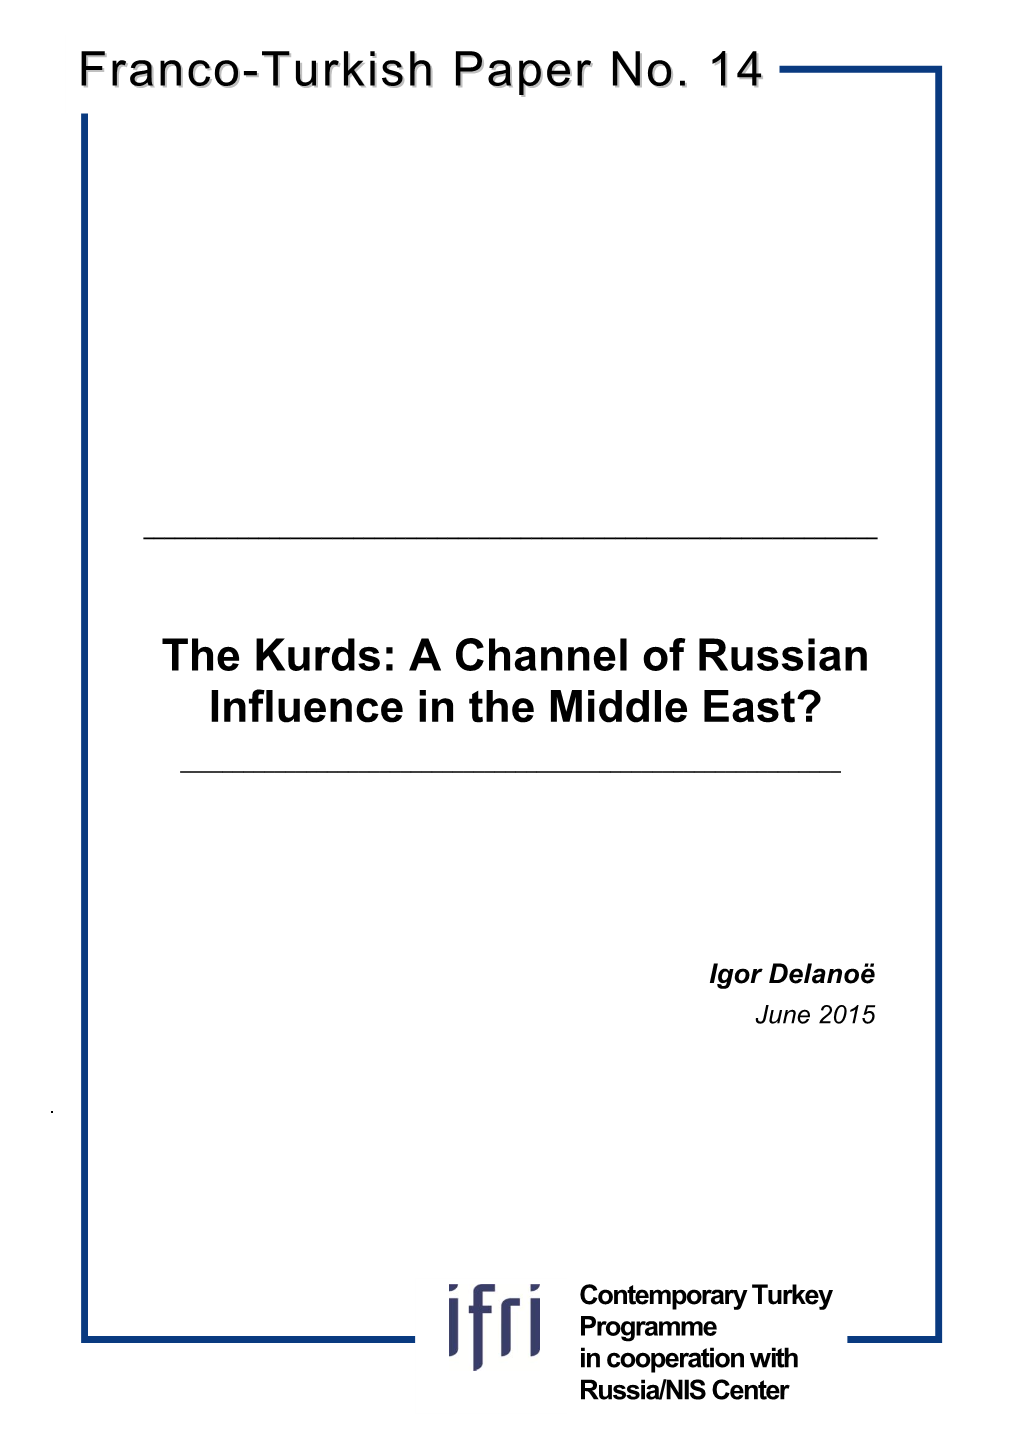 The Kurds: a Channel of Russian Influence in the Middle East?